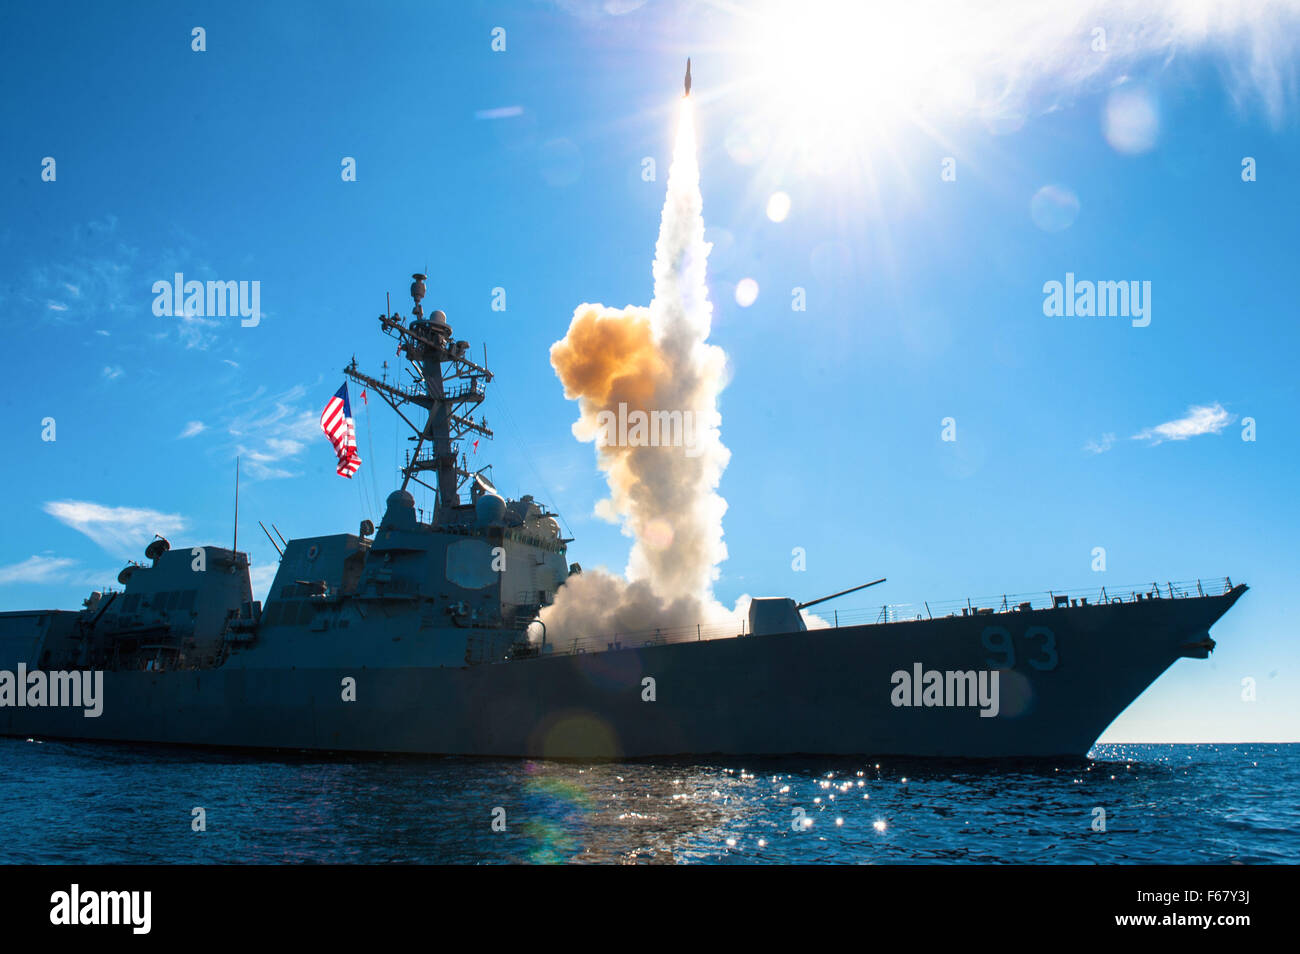 The U.S. Navy Arleigh Burke-class guided-missile destroyer USS Chung-Hoon launches a Standard Missile 2 from the forward deck during a missile exercise November 10, 2012 in the Pacific Ocean. Stock Photo